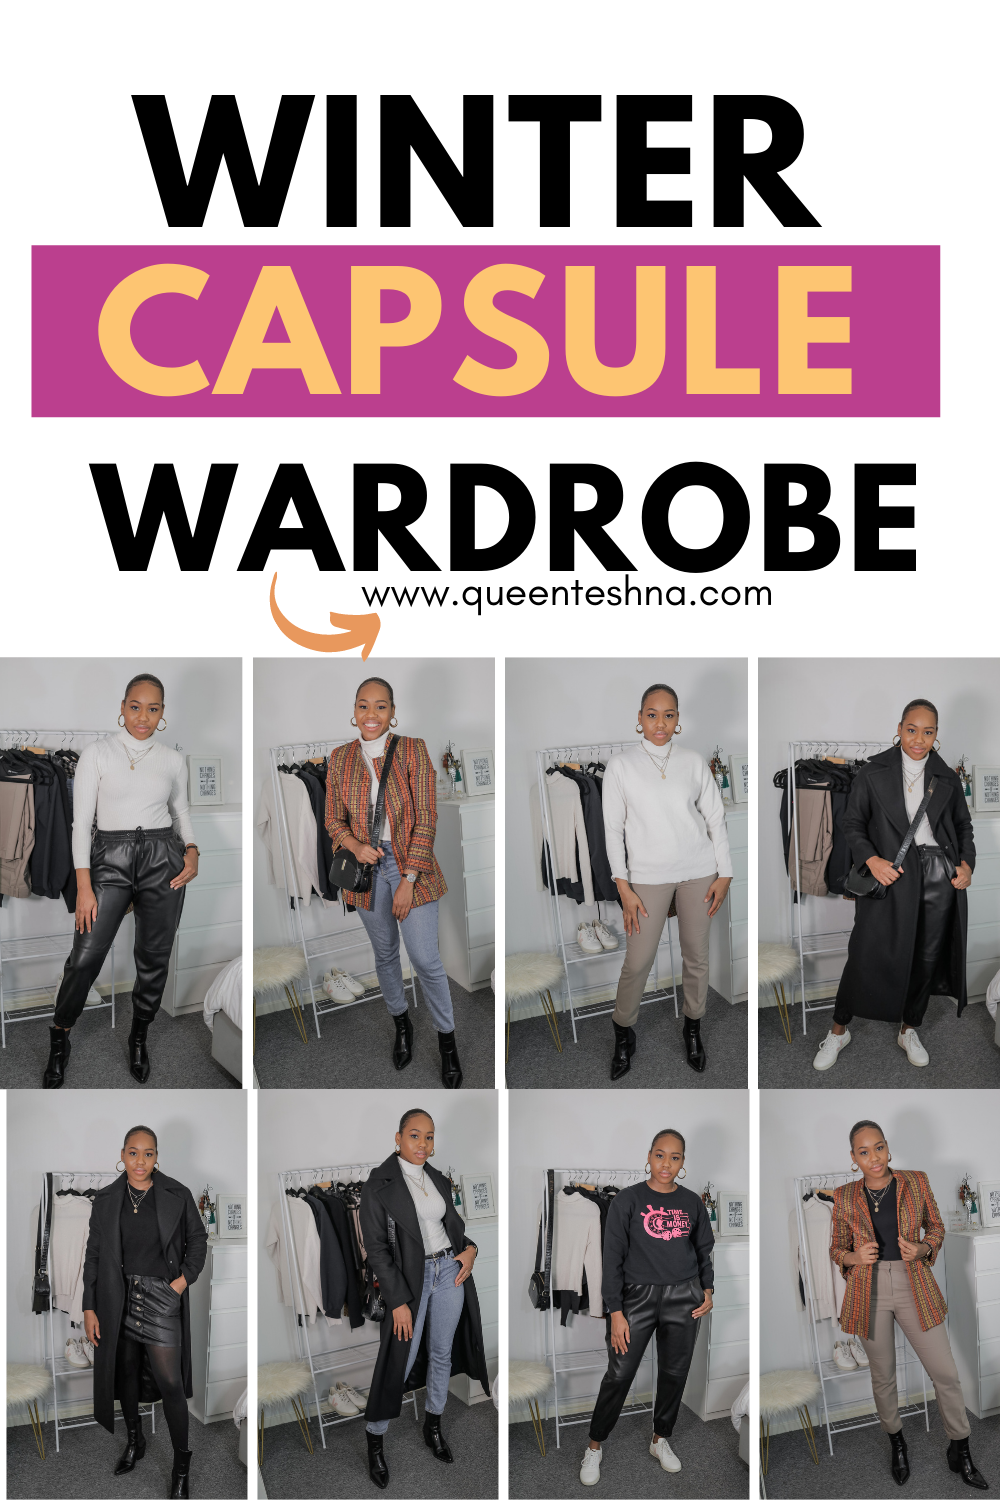 Winter Capsule wardrobe – 15 items over 30 outfits